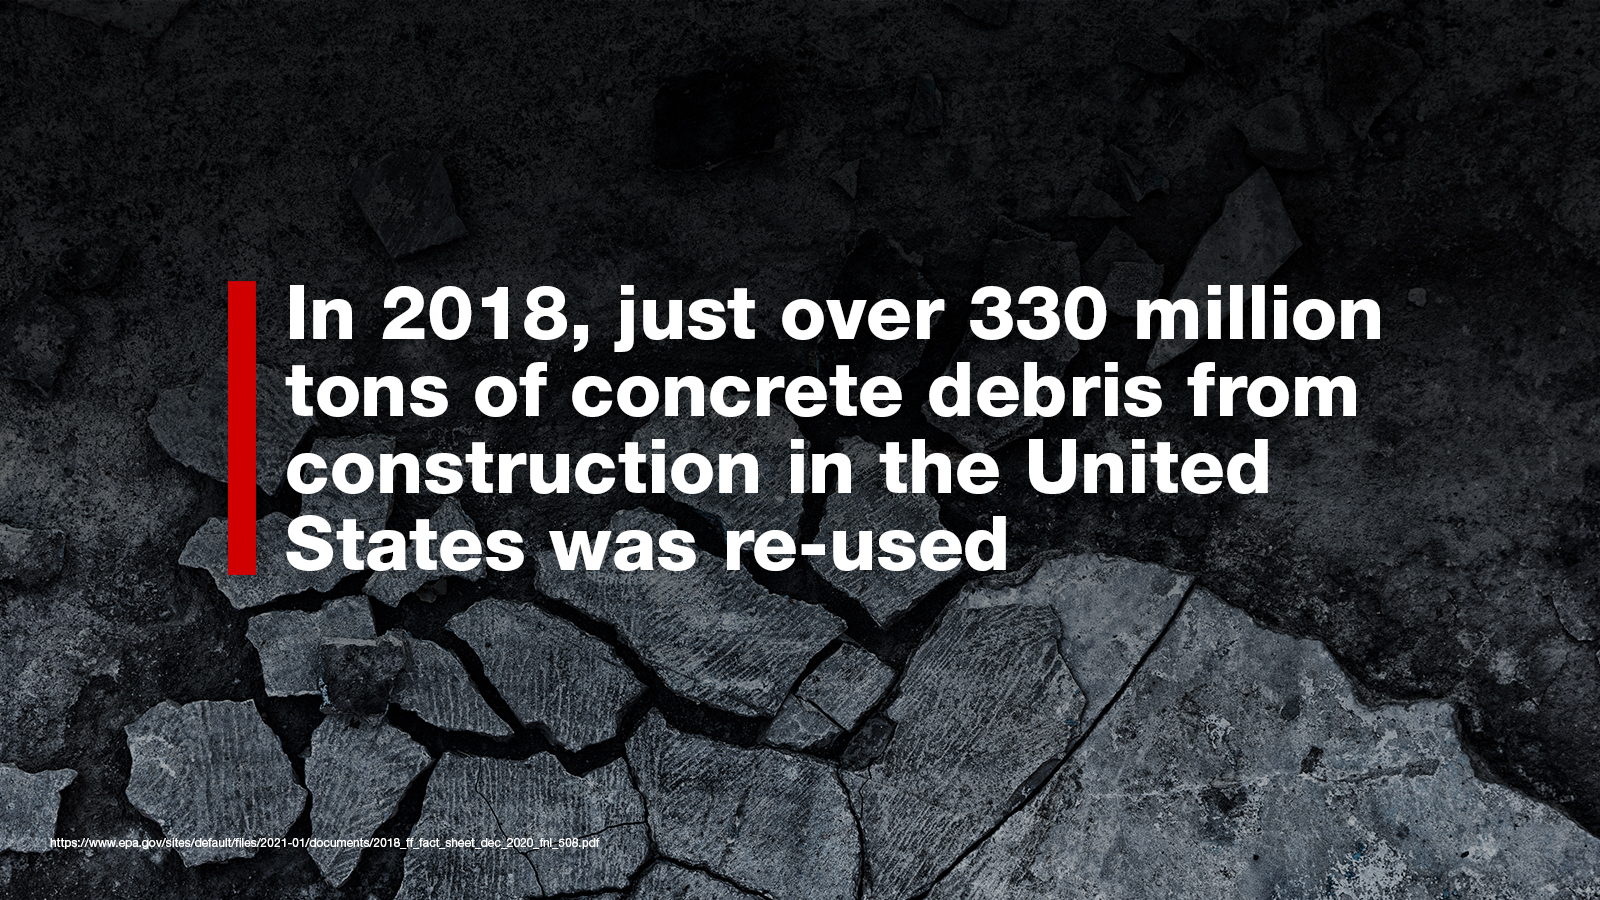 In 2018, just over 330 million tons of concrete debris from construction was re-used